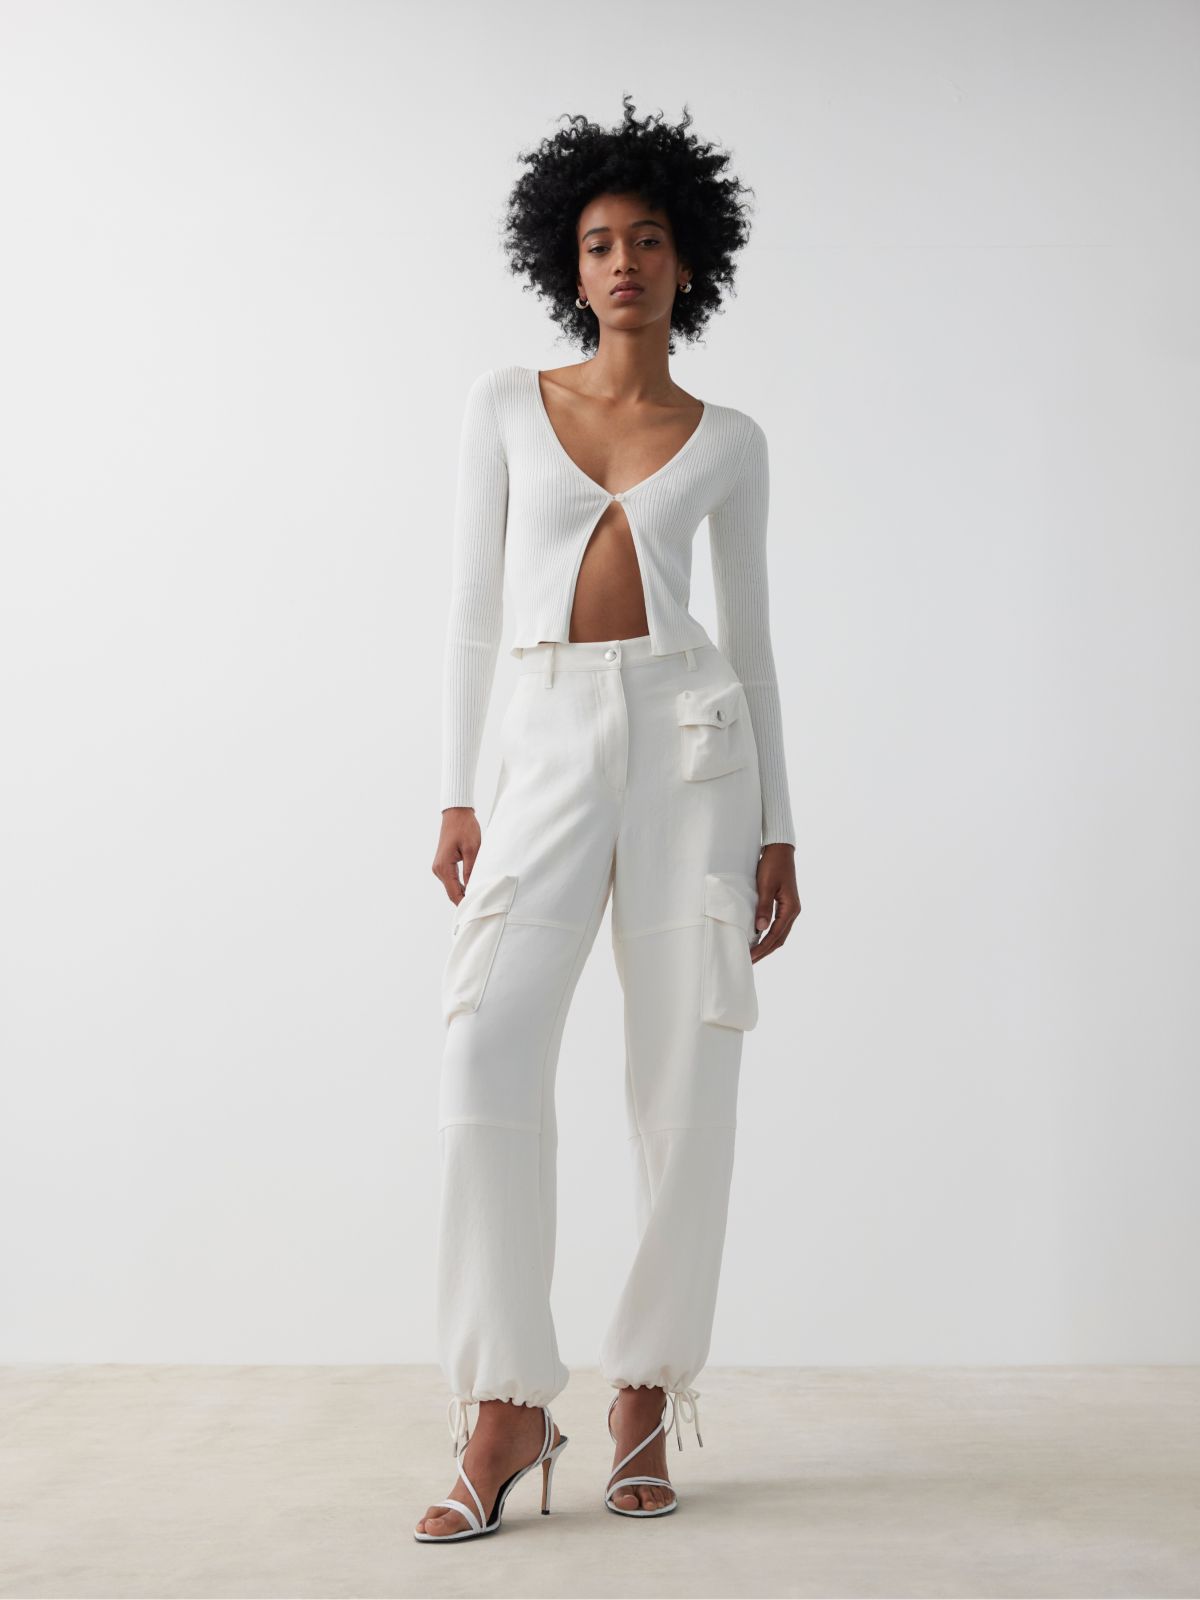 The spring sporty girl outfit every aritzia girl needs - white